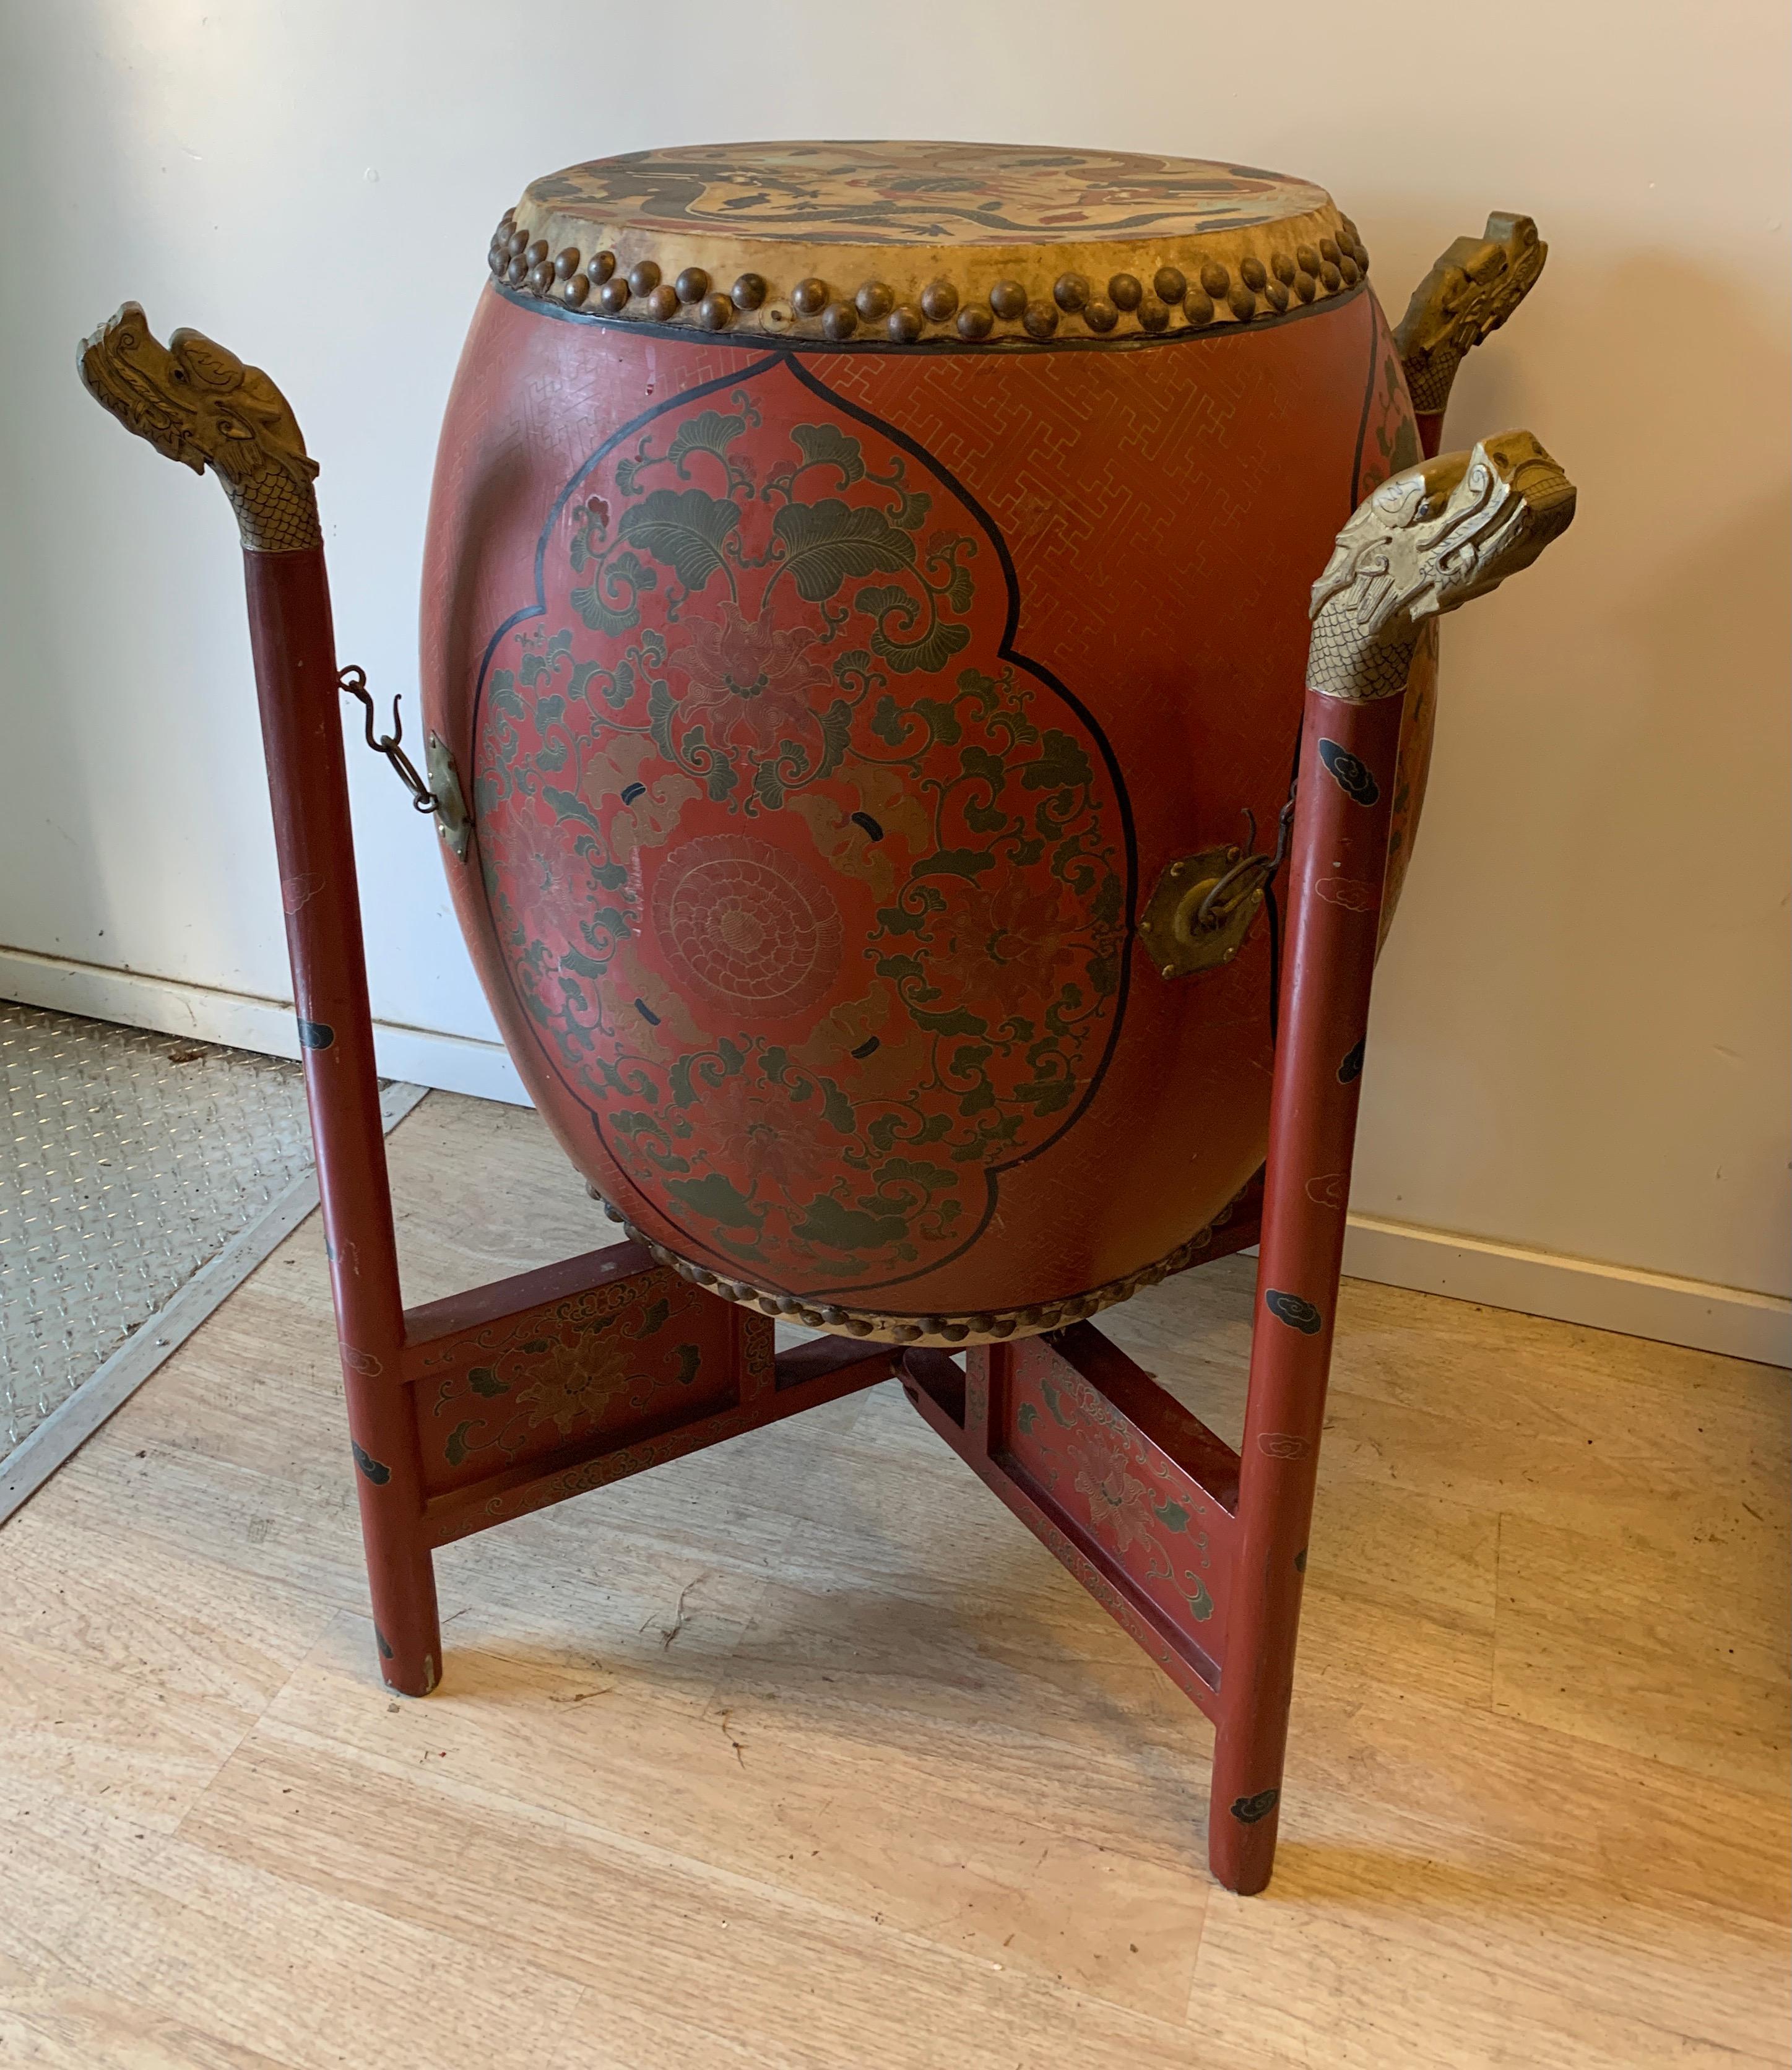 Chinese Lacquer Double Sided Qing Dynasty Drum with Wooden Stand and Drum Sticks For Sale 2